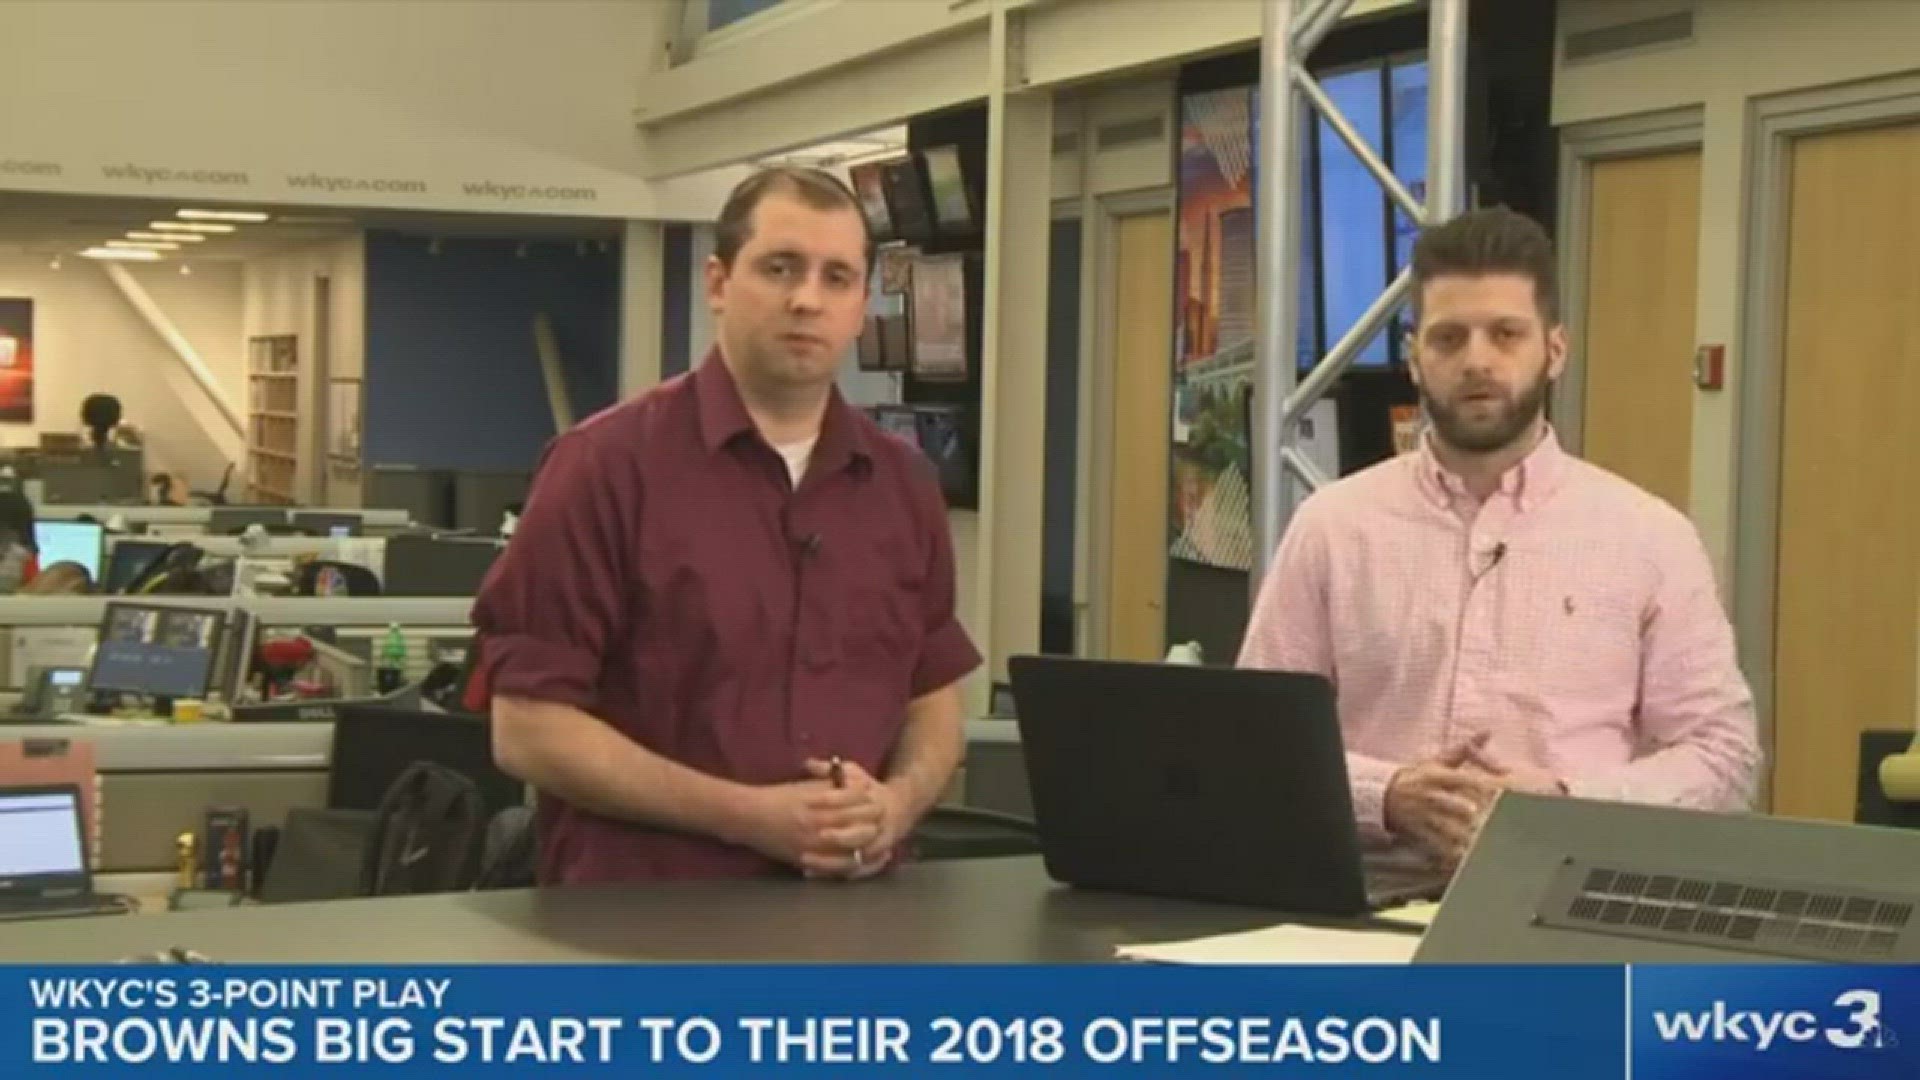 WKYC's Ben Axelrod and Matt Florjancic break down the latest offseason moves of the Cleveland Browns.